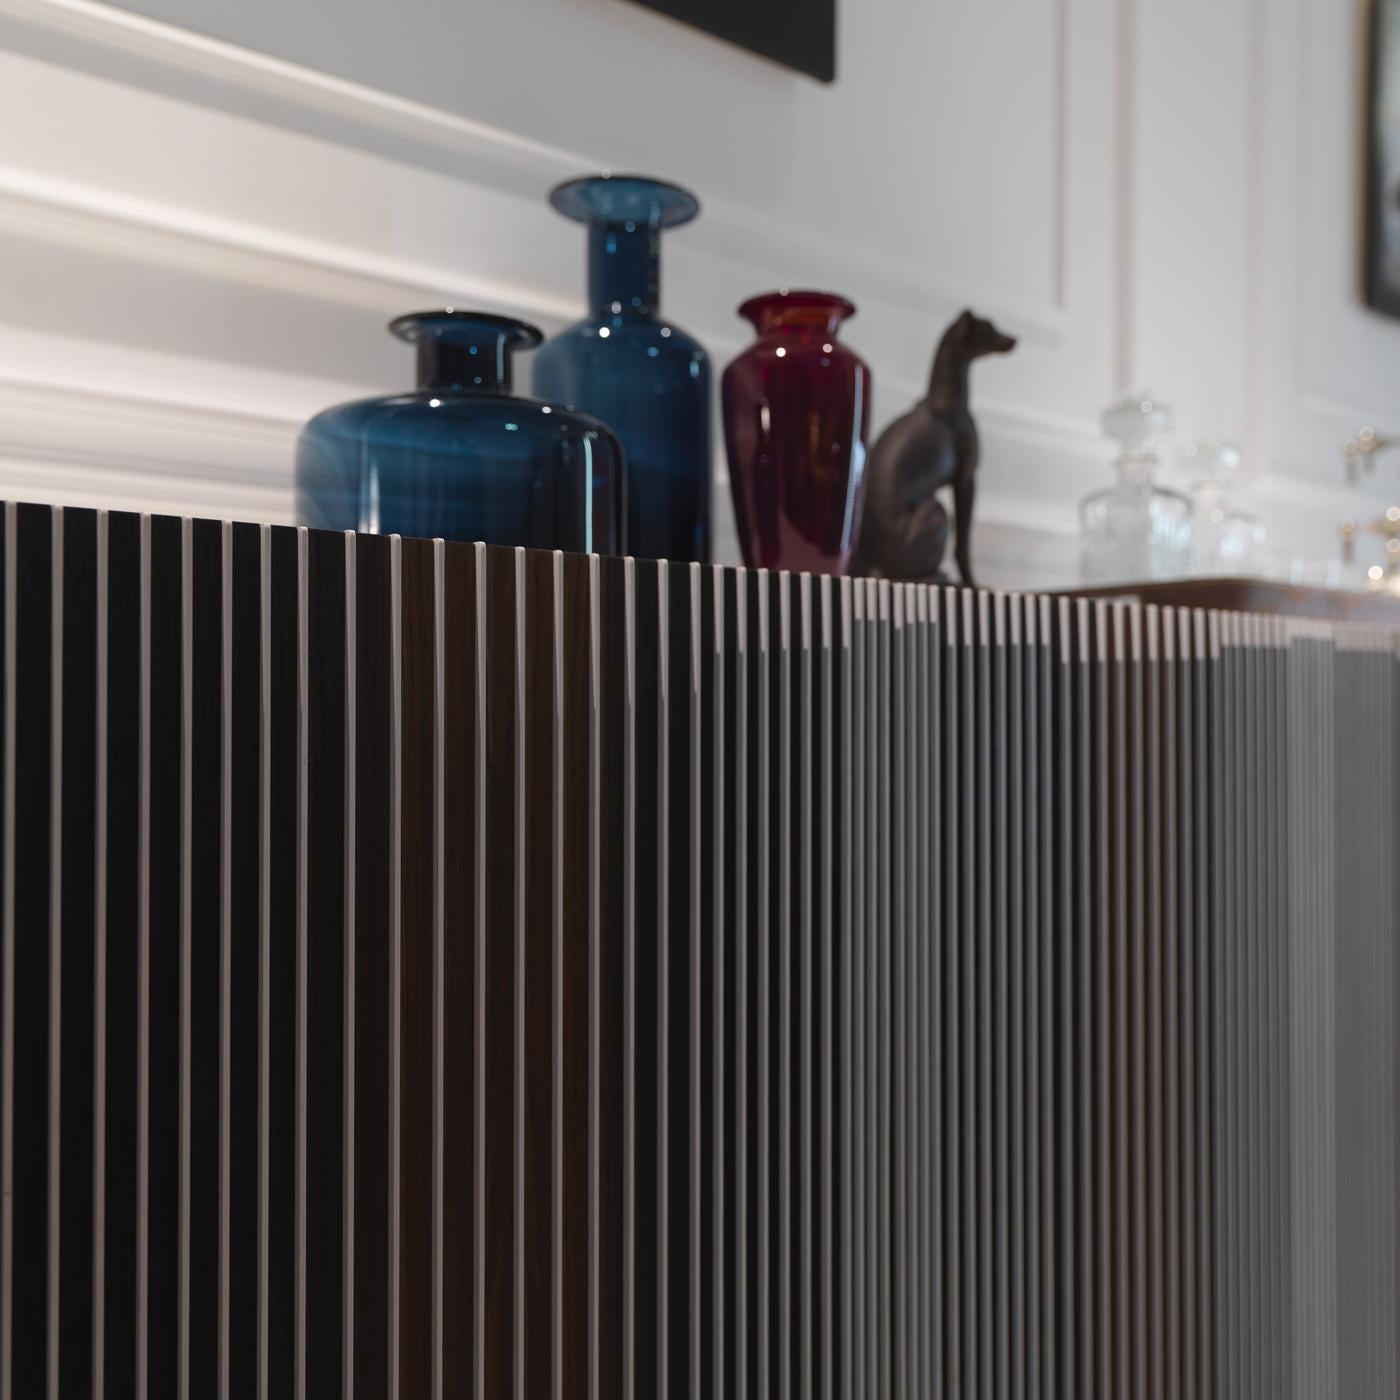 Exquisitely designed by Renato Zamberlan, who took inspiration from the work of Venezuelan artist Carlos Cruz-Diez, this four-door sideboard combines functionality and elegance in a refined silhouette. Made of thermo-treated oak with veneered MDF